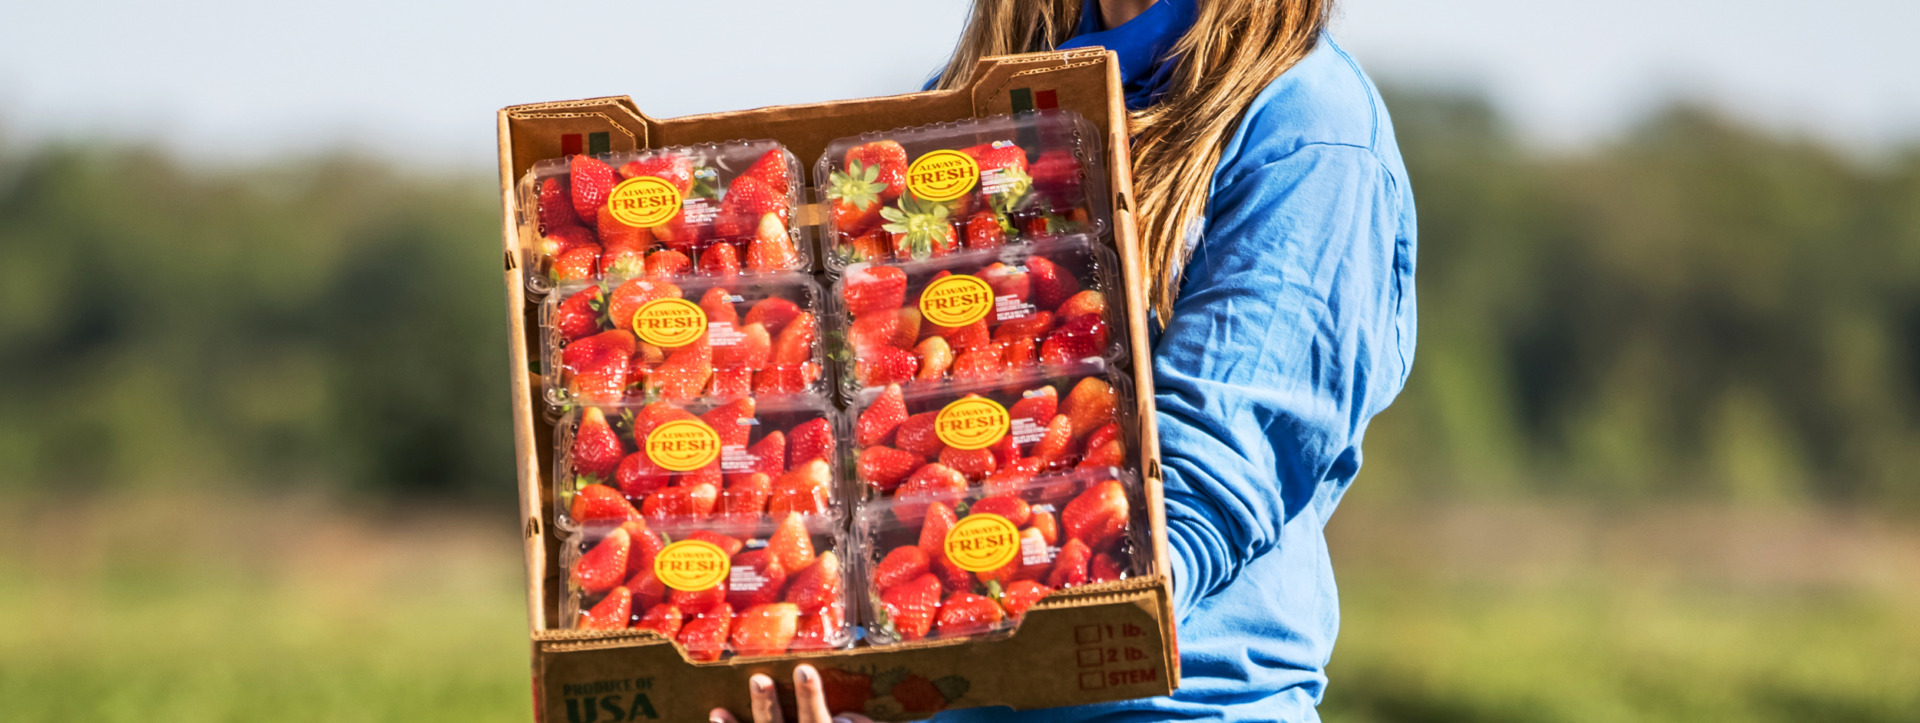 Image of a person in a field holding a packed boxed with eight Always Fresh strawberry containers.